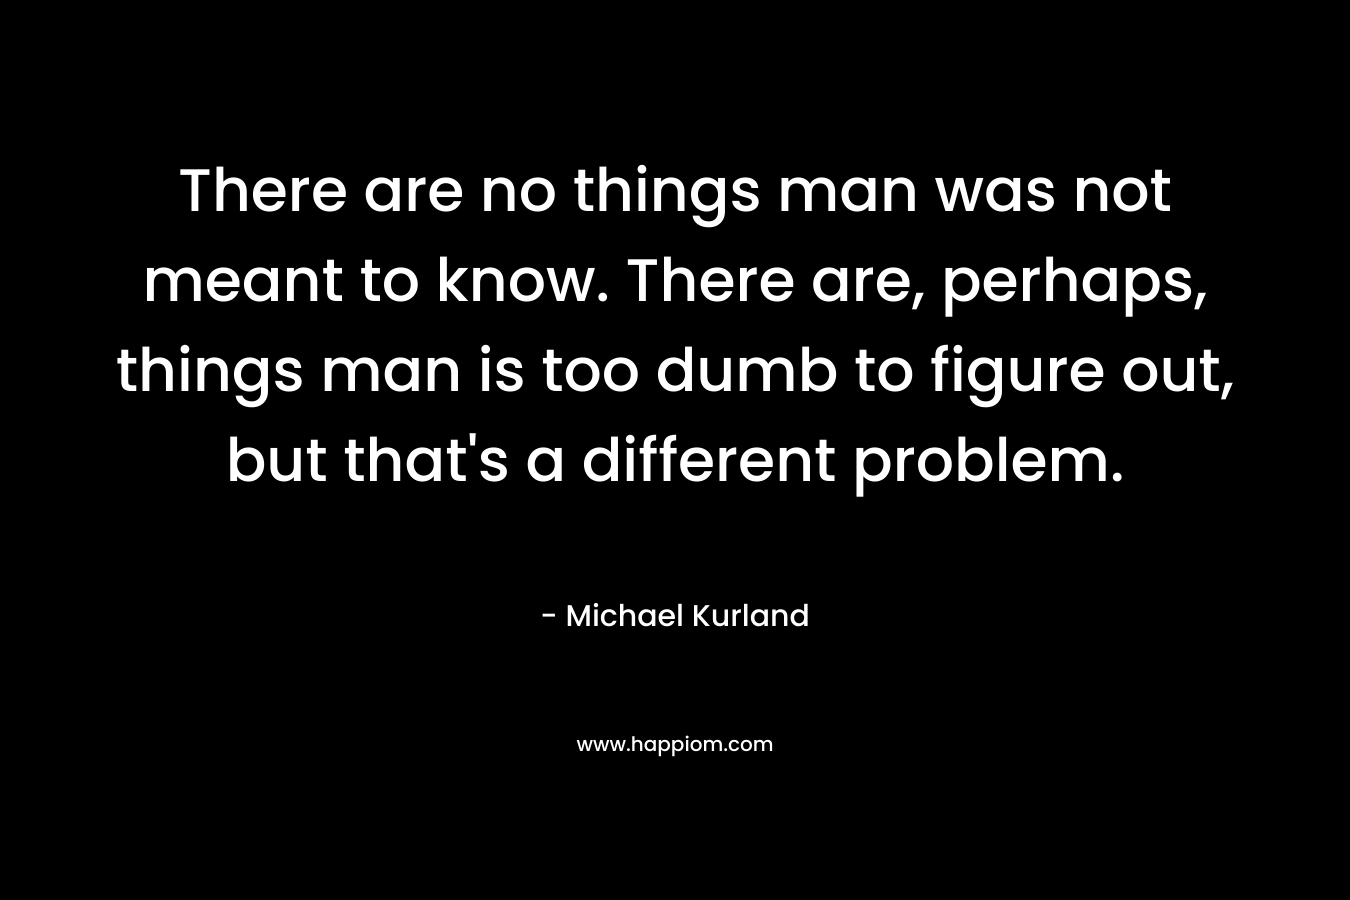 There are no things man was not meant to know. There are, perhaps, things man is too dumb to figure out, but that's a different problem.